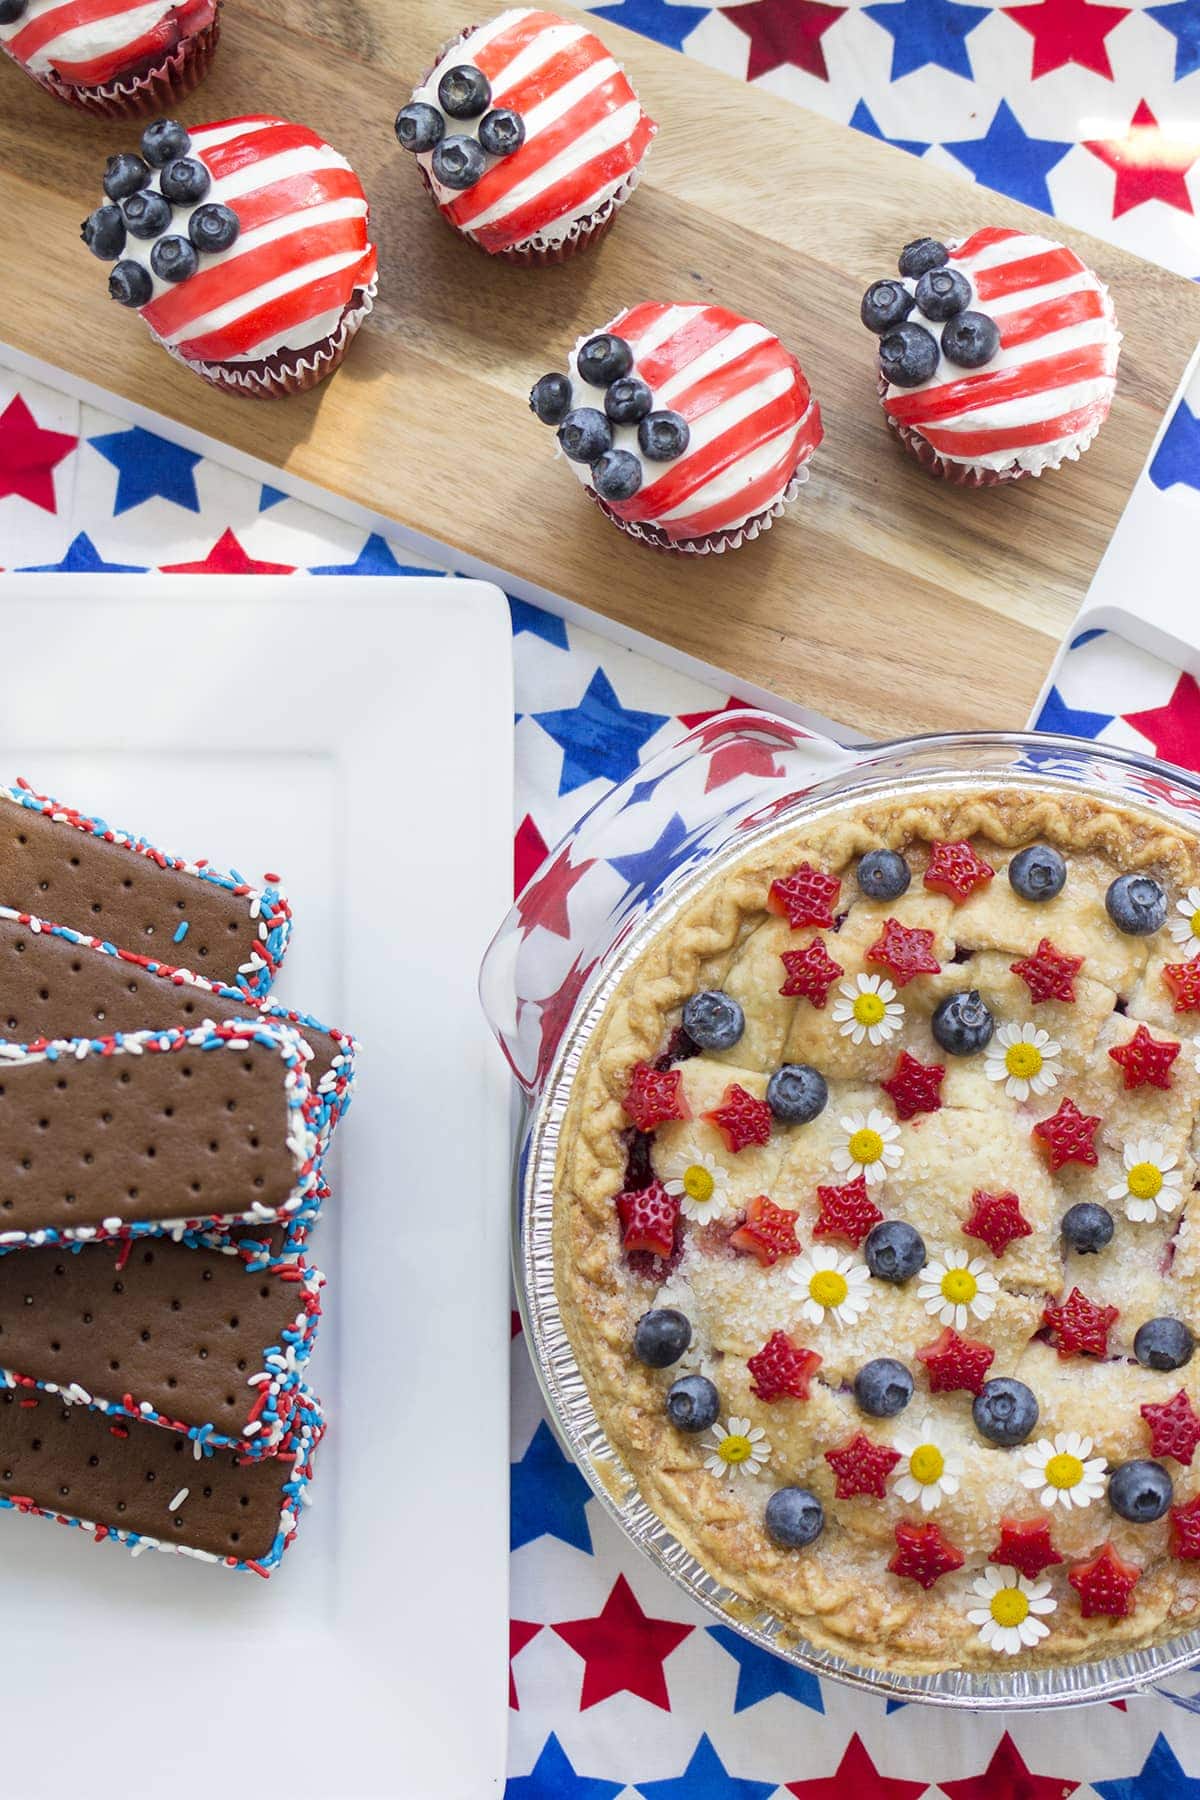 Three 4th of July Grocery Store Hacks to Try